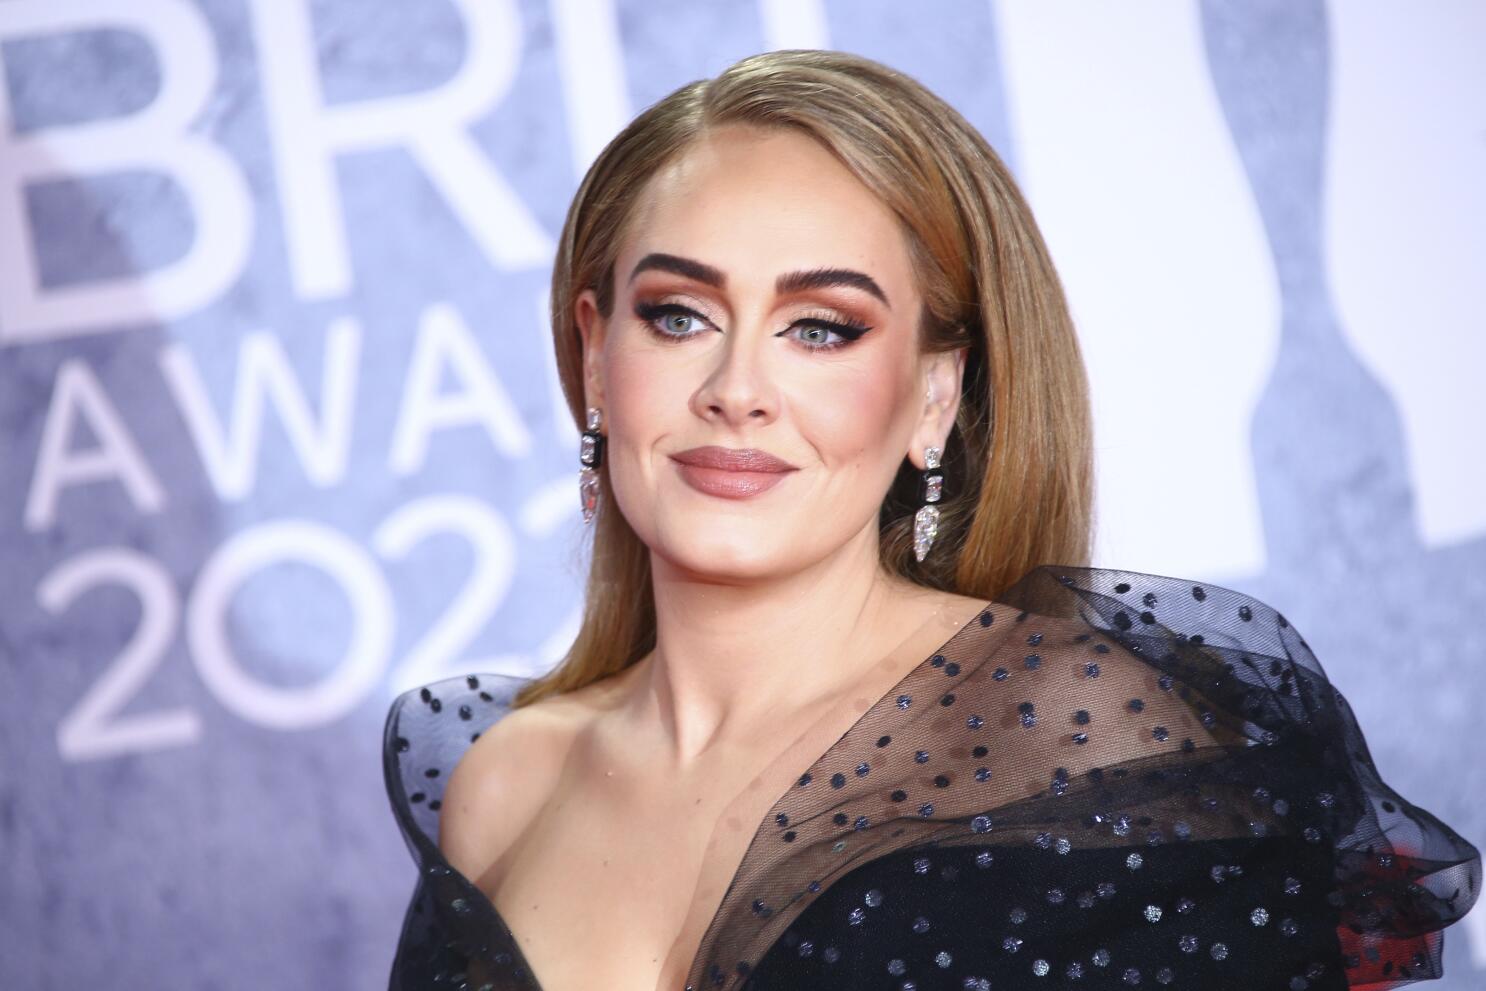 Adele Stopped Drinking 3 Months Ago: I Was a ‘Borderline Alcoholic’ in My 20s [Video]